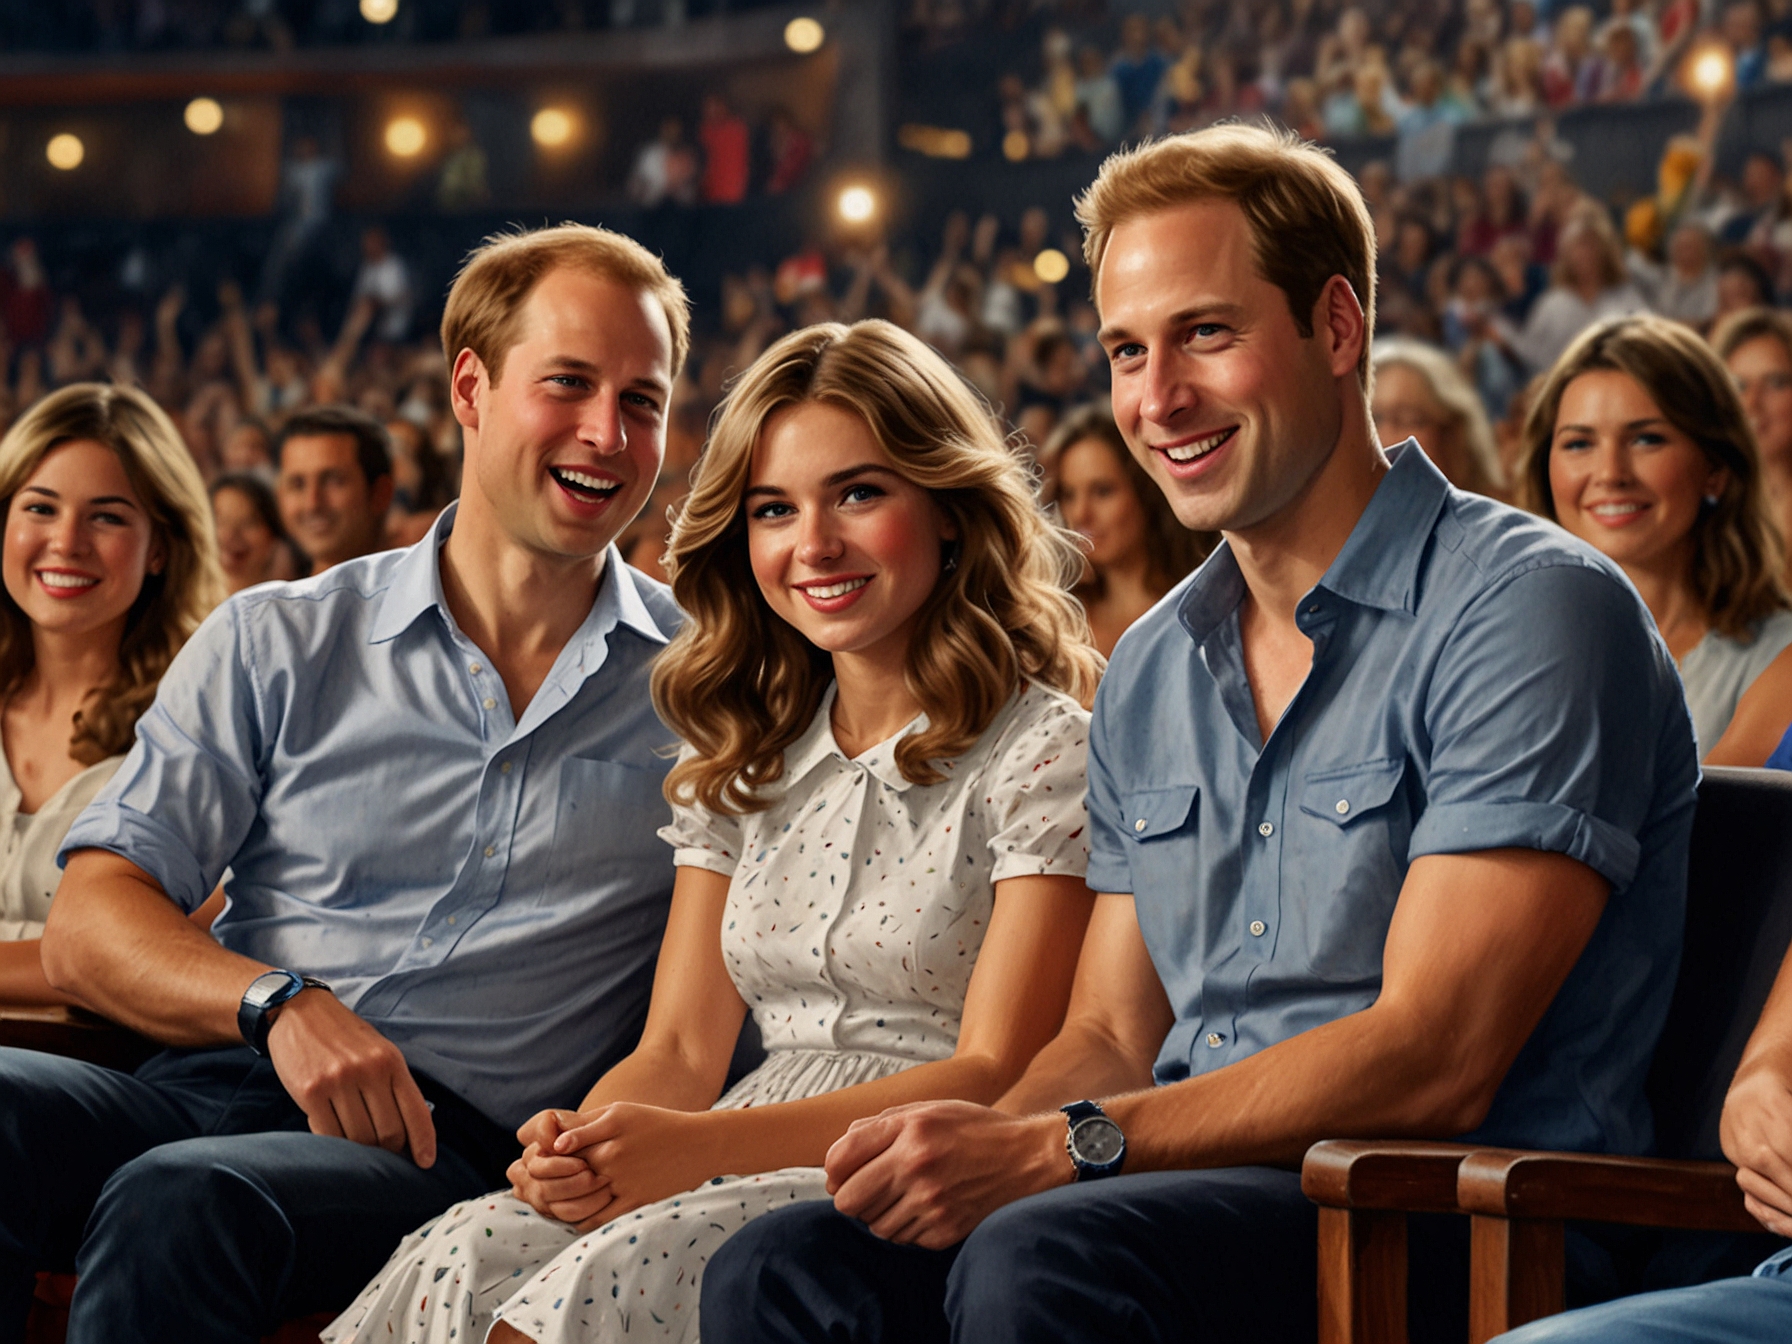 Prince William and his children, Prince George, Princess Charlotte, and Prince Louis, enjoying Taylor Swift's concert, blending in with the enthusiastic crowd, dancing and singing along.